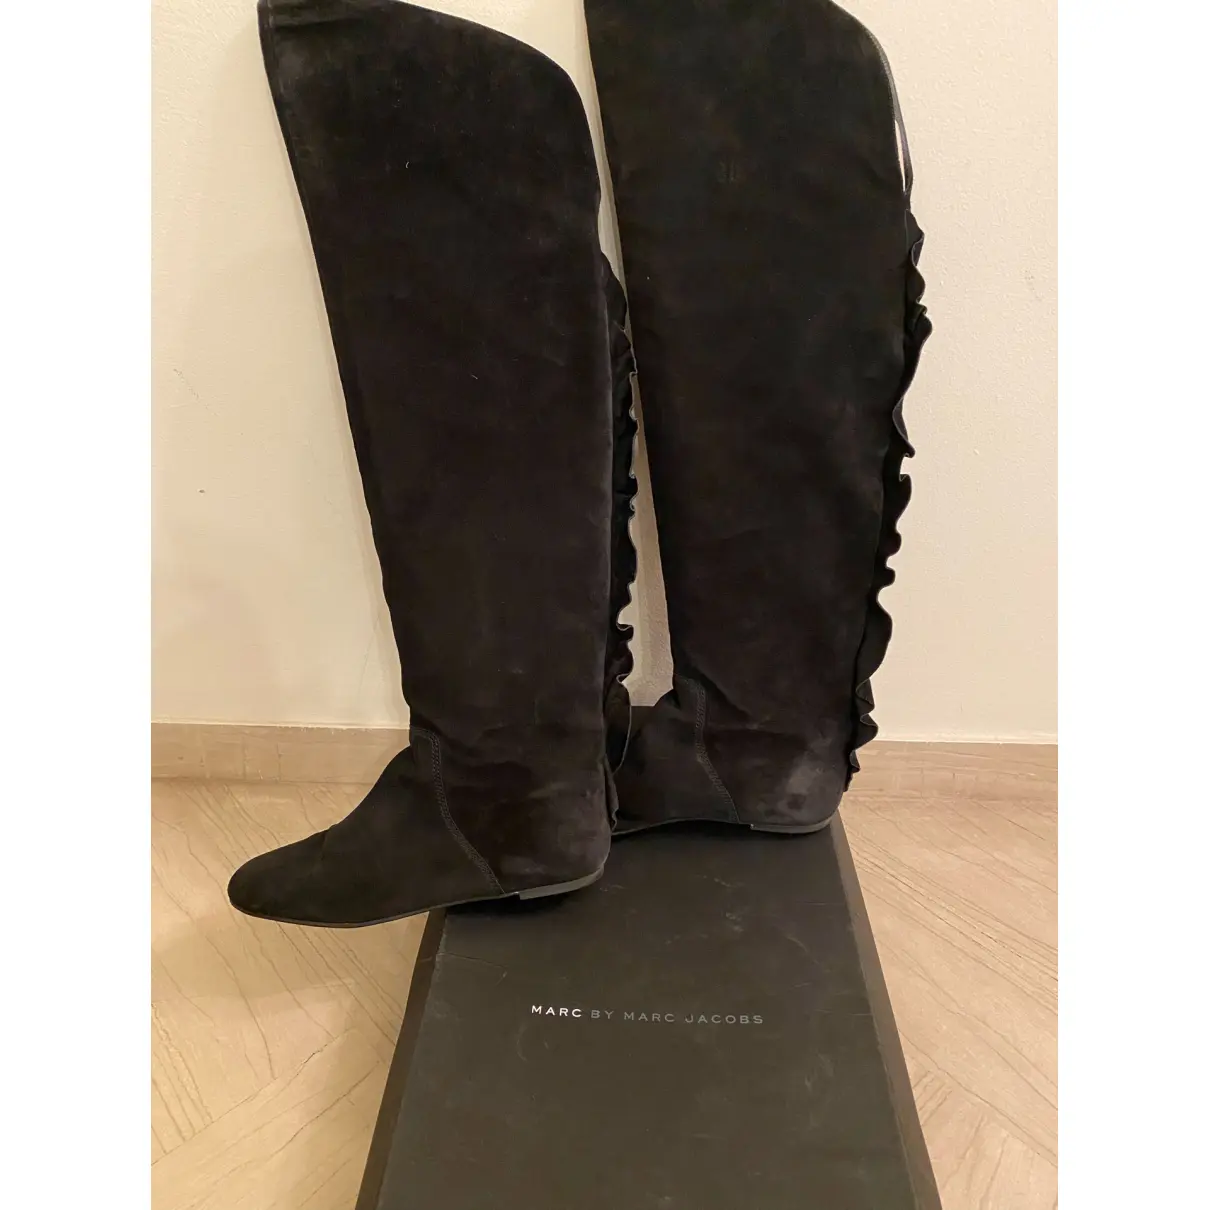 Buy Marc by Marc Jacobs Boots online